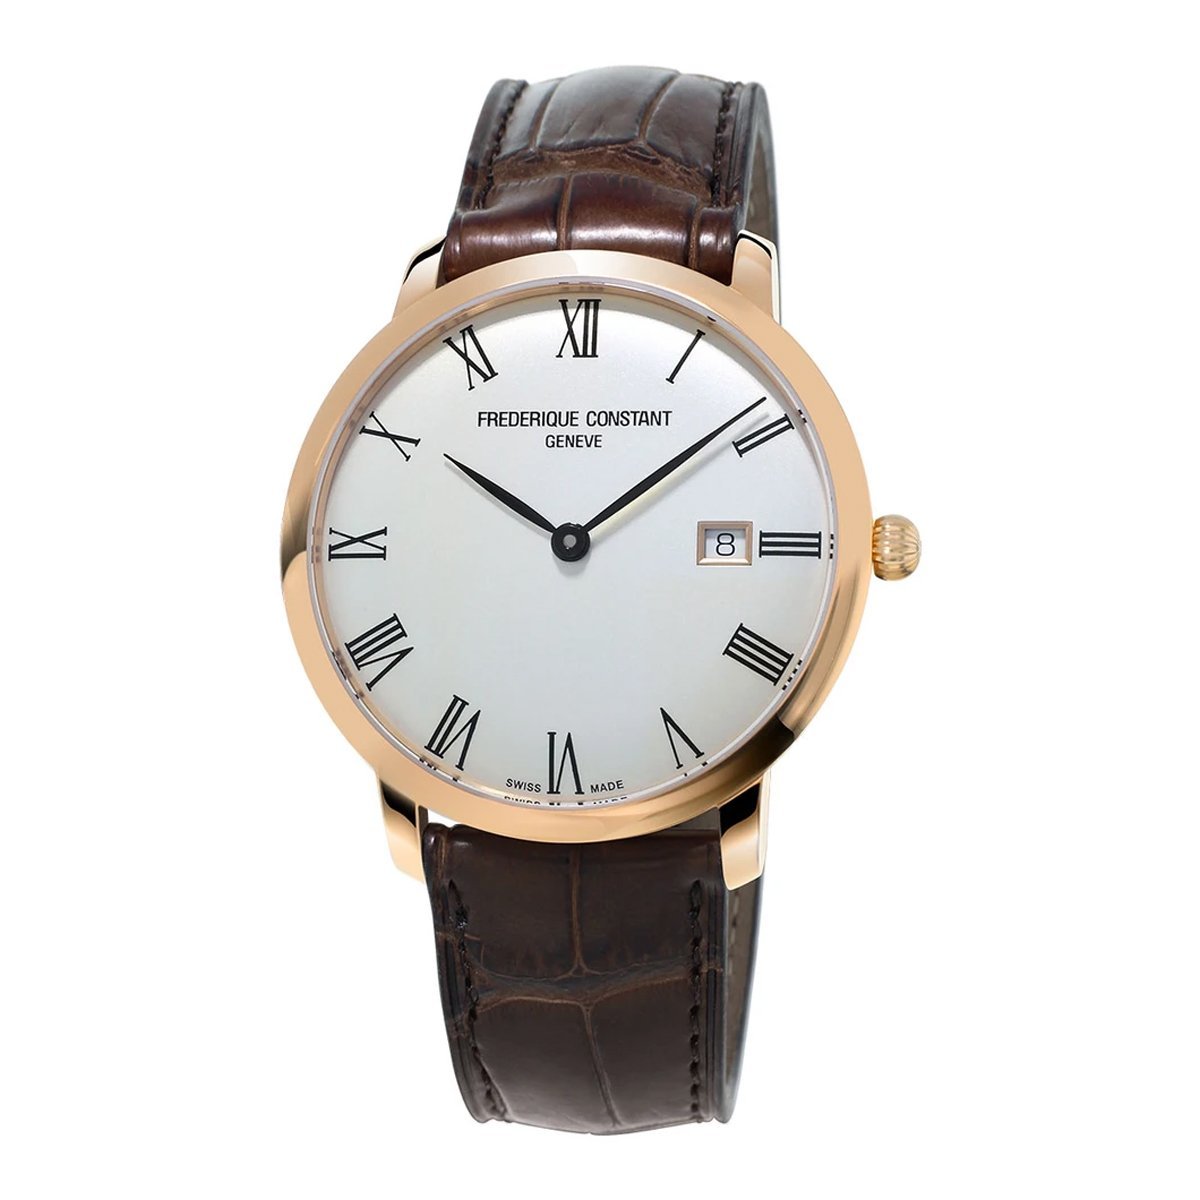 Frederique Constant Slimline Automatic Men's Watch FC-306MR4S4 - Watches & Crystals